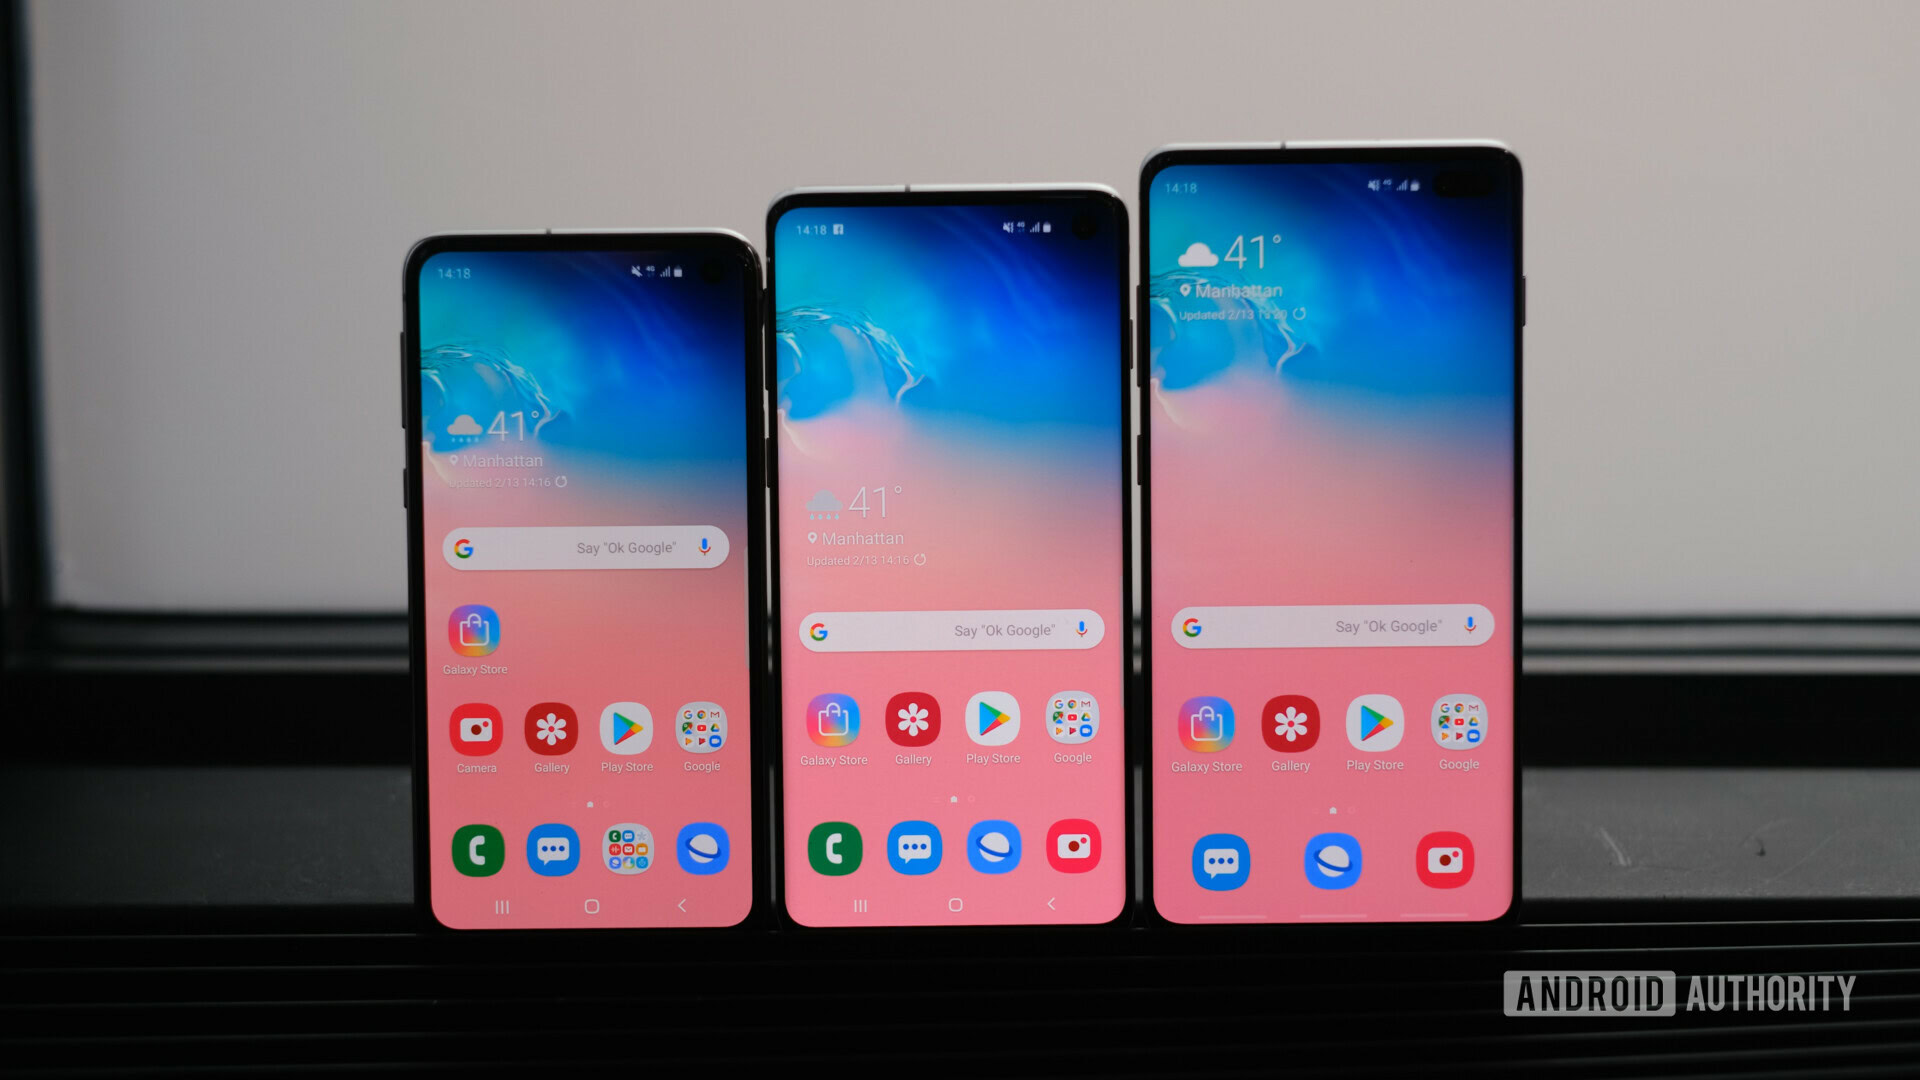 Samsung Galaxy S10 price, release date, availability - Android